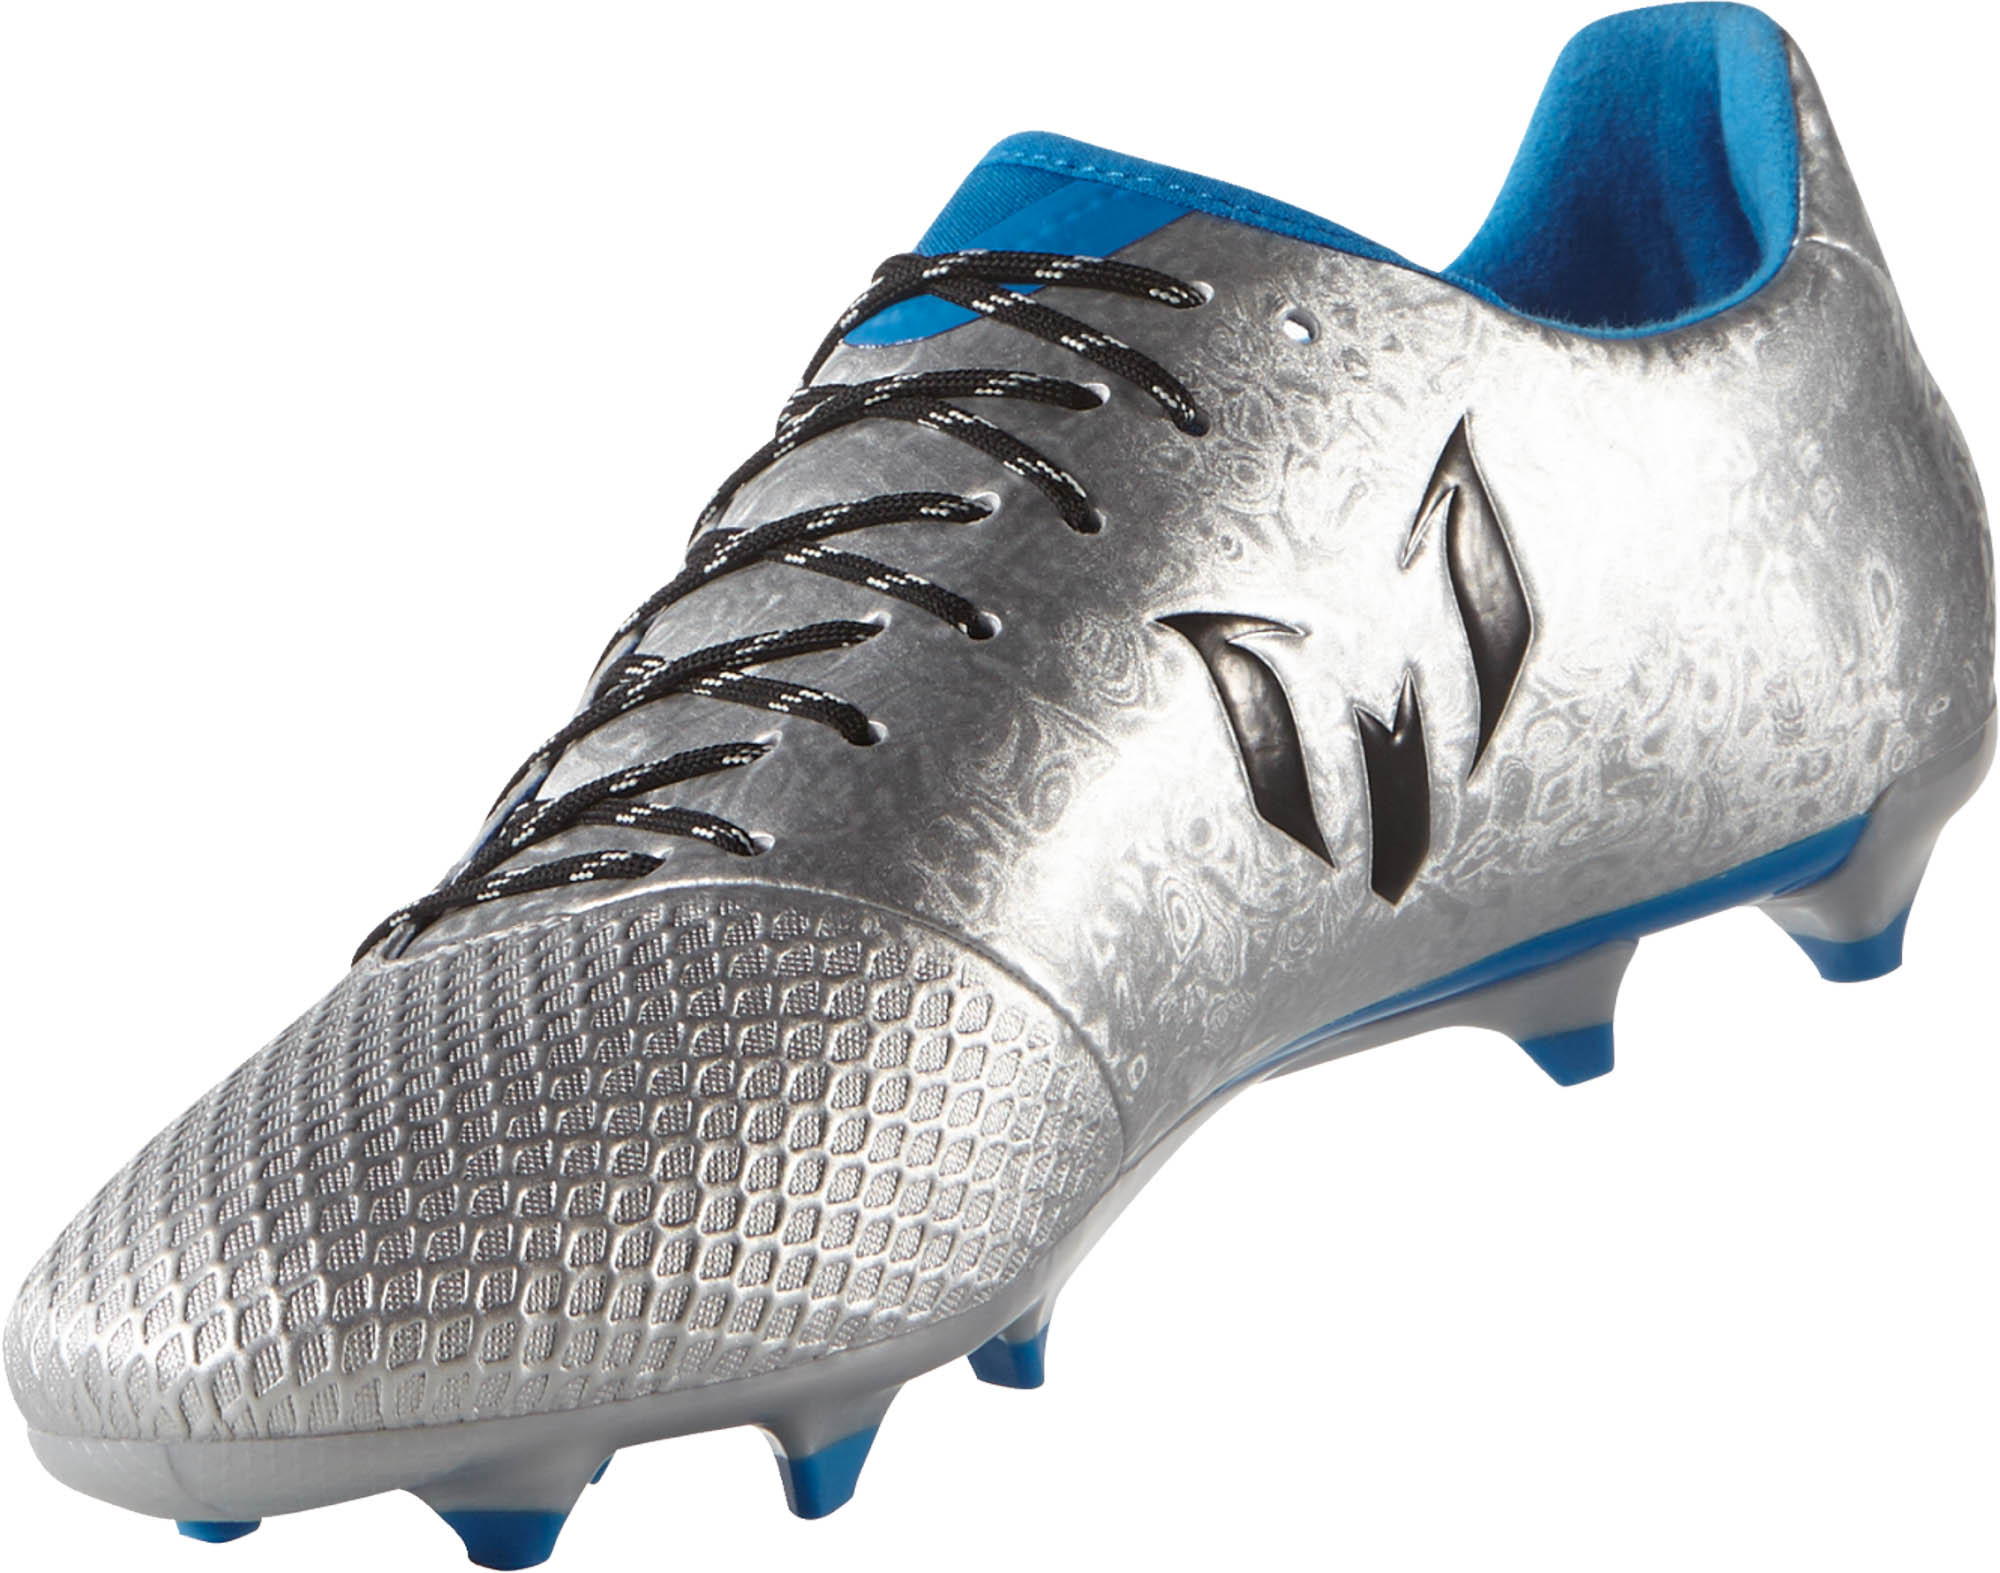 adidas Messi 16.3 FG Cleats - Silver 